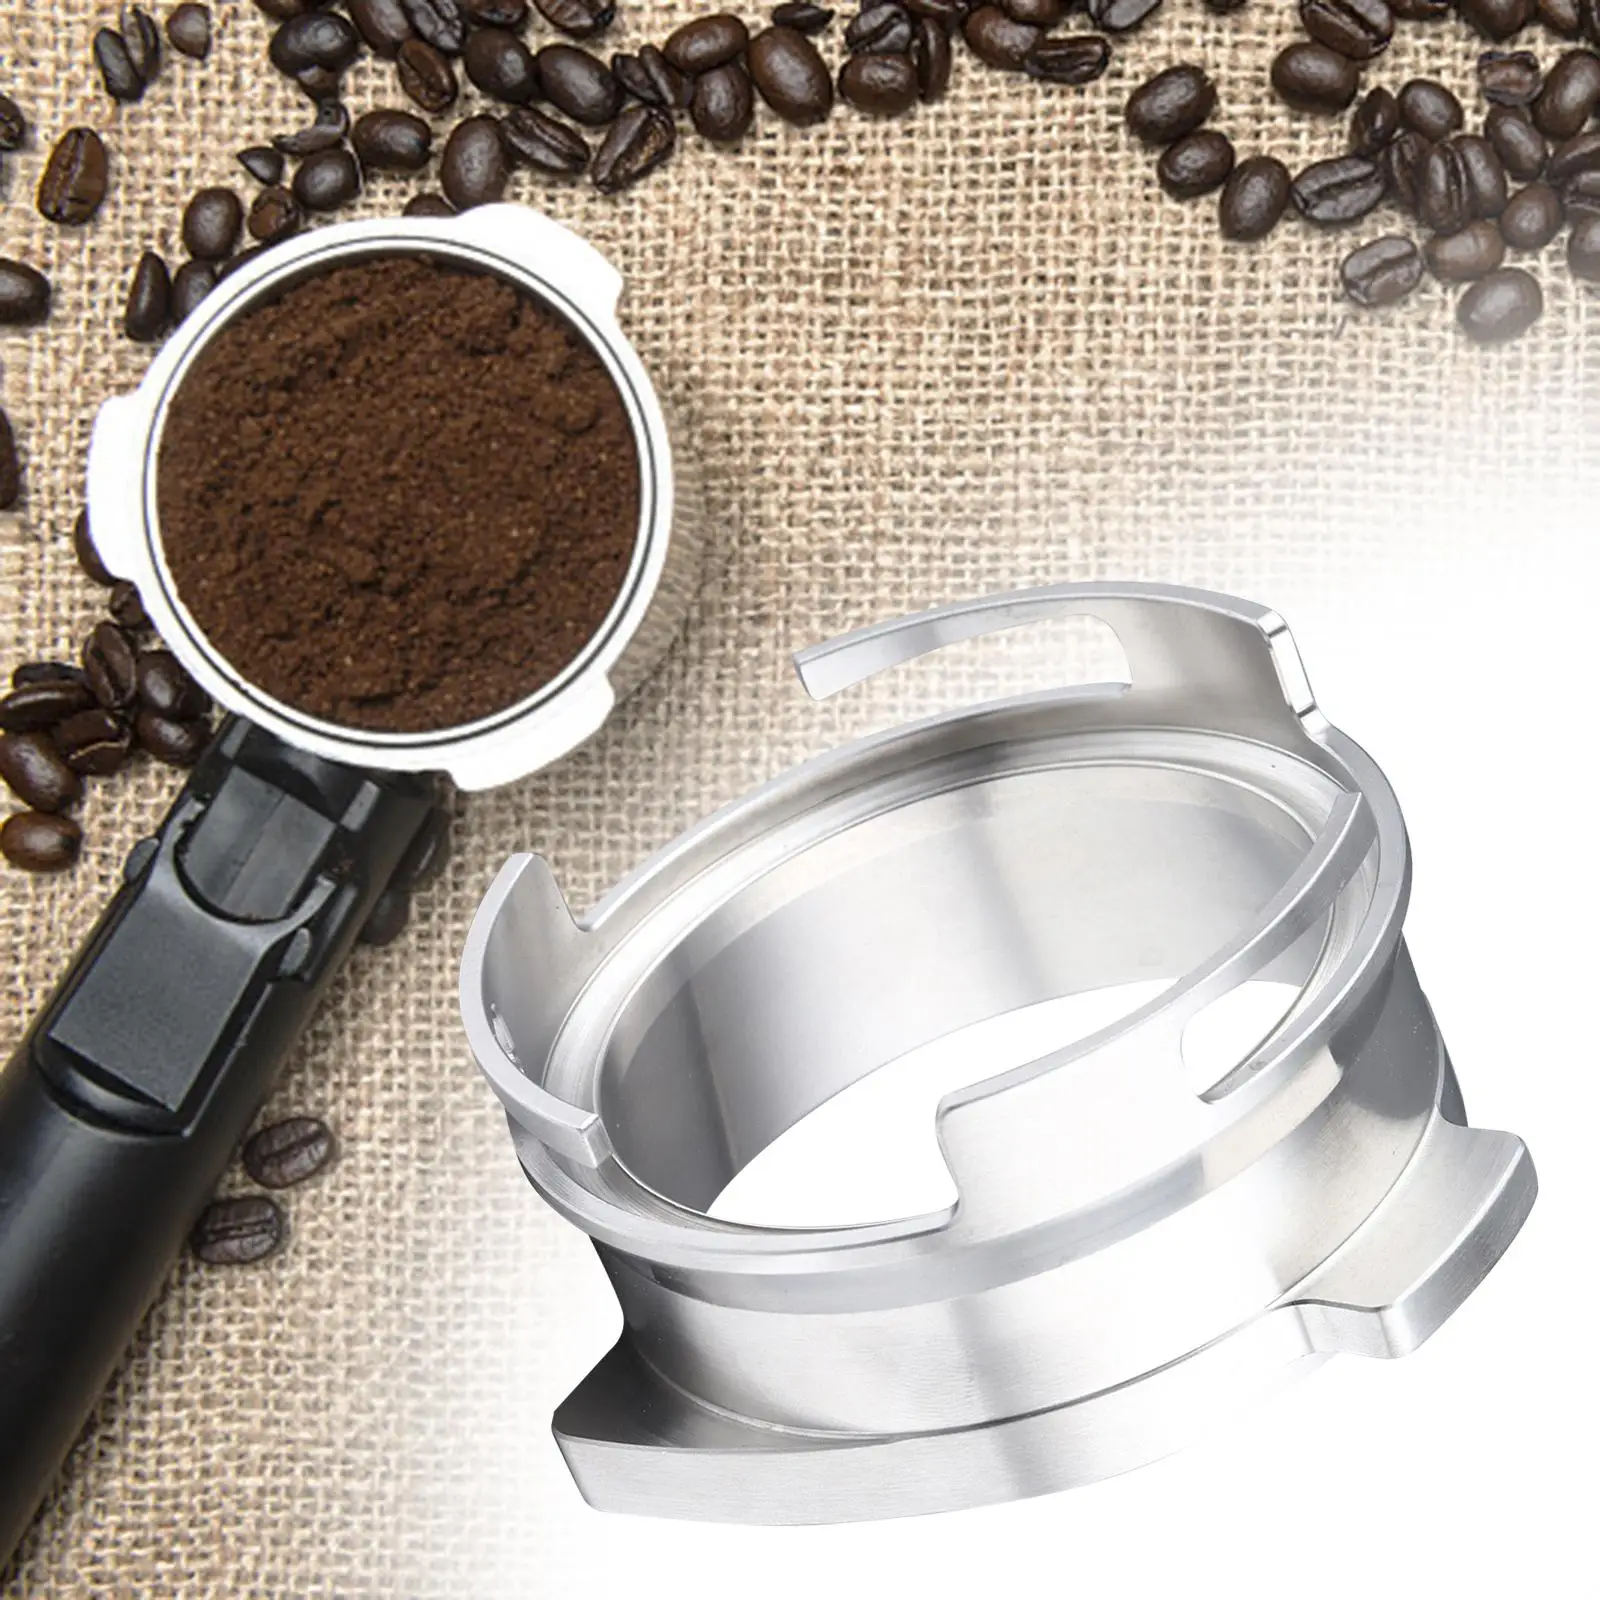 Espresso Funnel Rings Stainless Steel for 54mm Easily Connect and Remove Accessories Durable for Home or Cafe